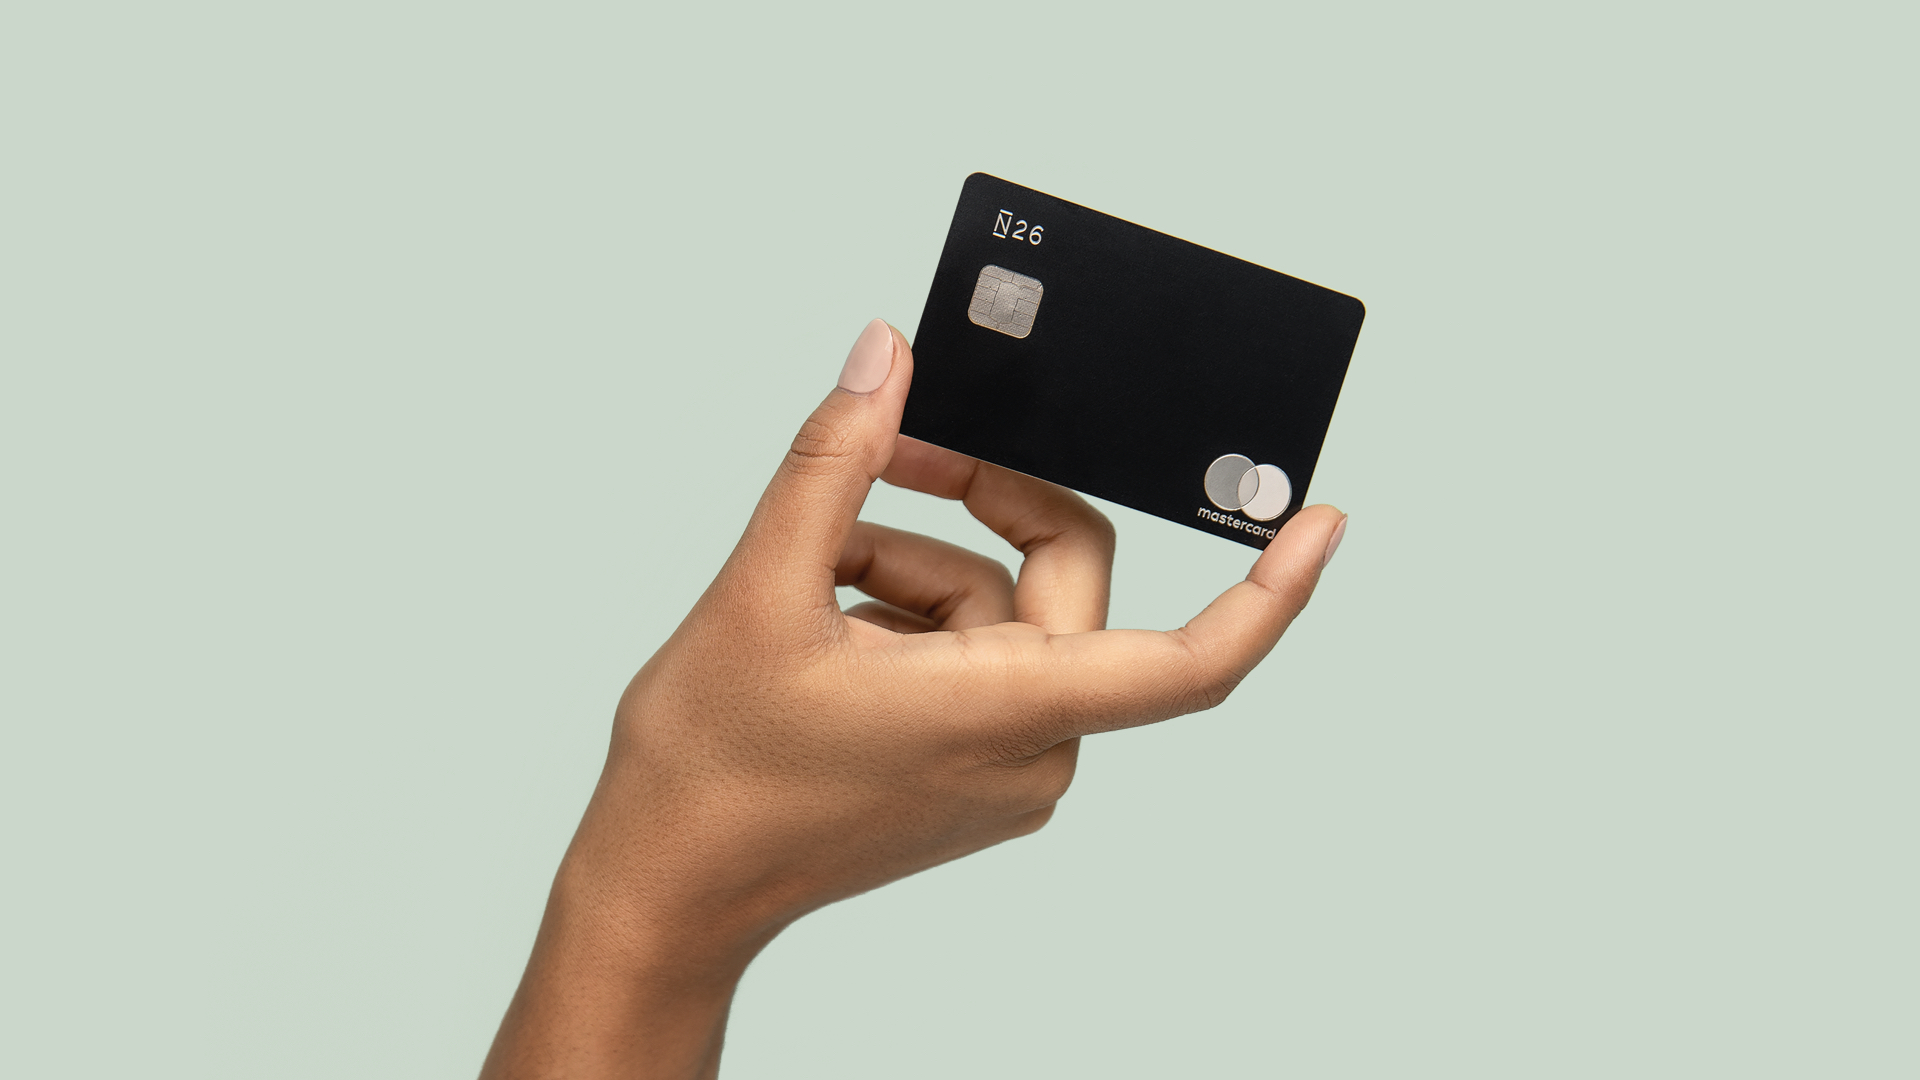 N26 Press Image of our 26 reasons campaign with a hand holding a premium charcoal black metal card